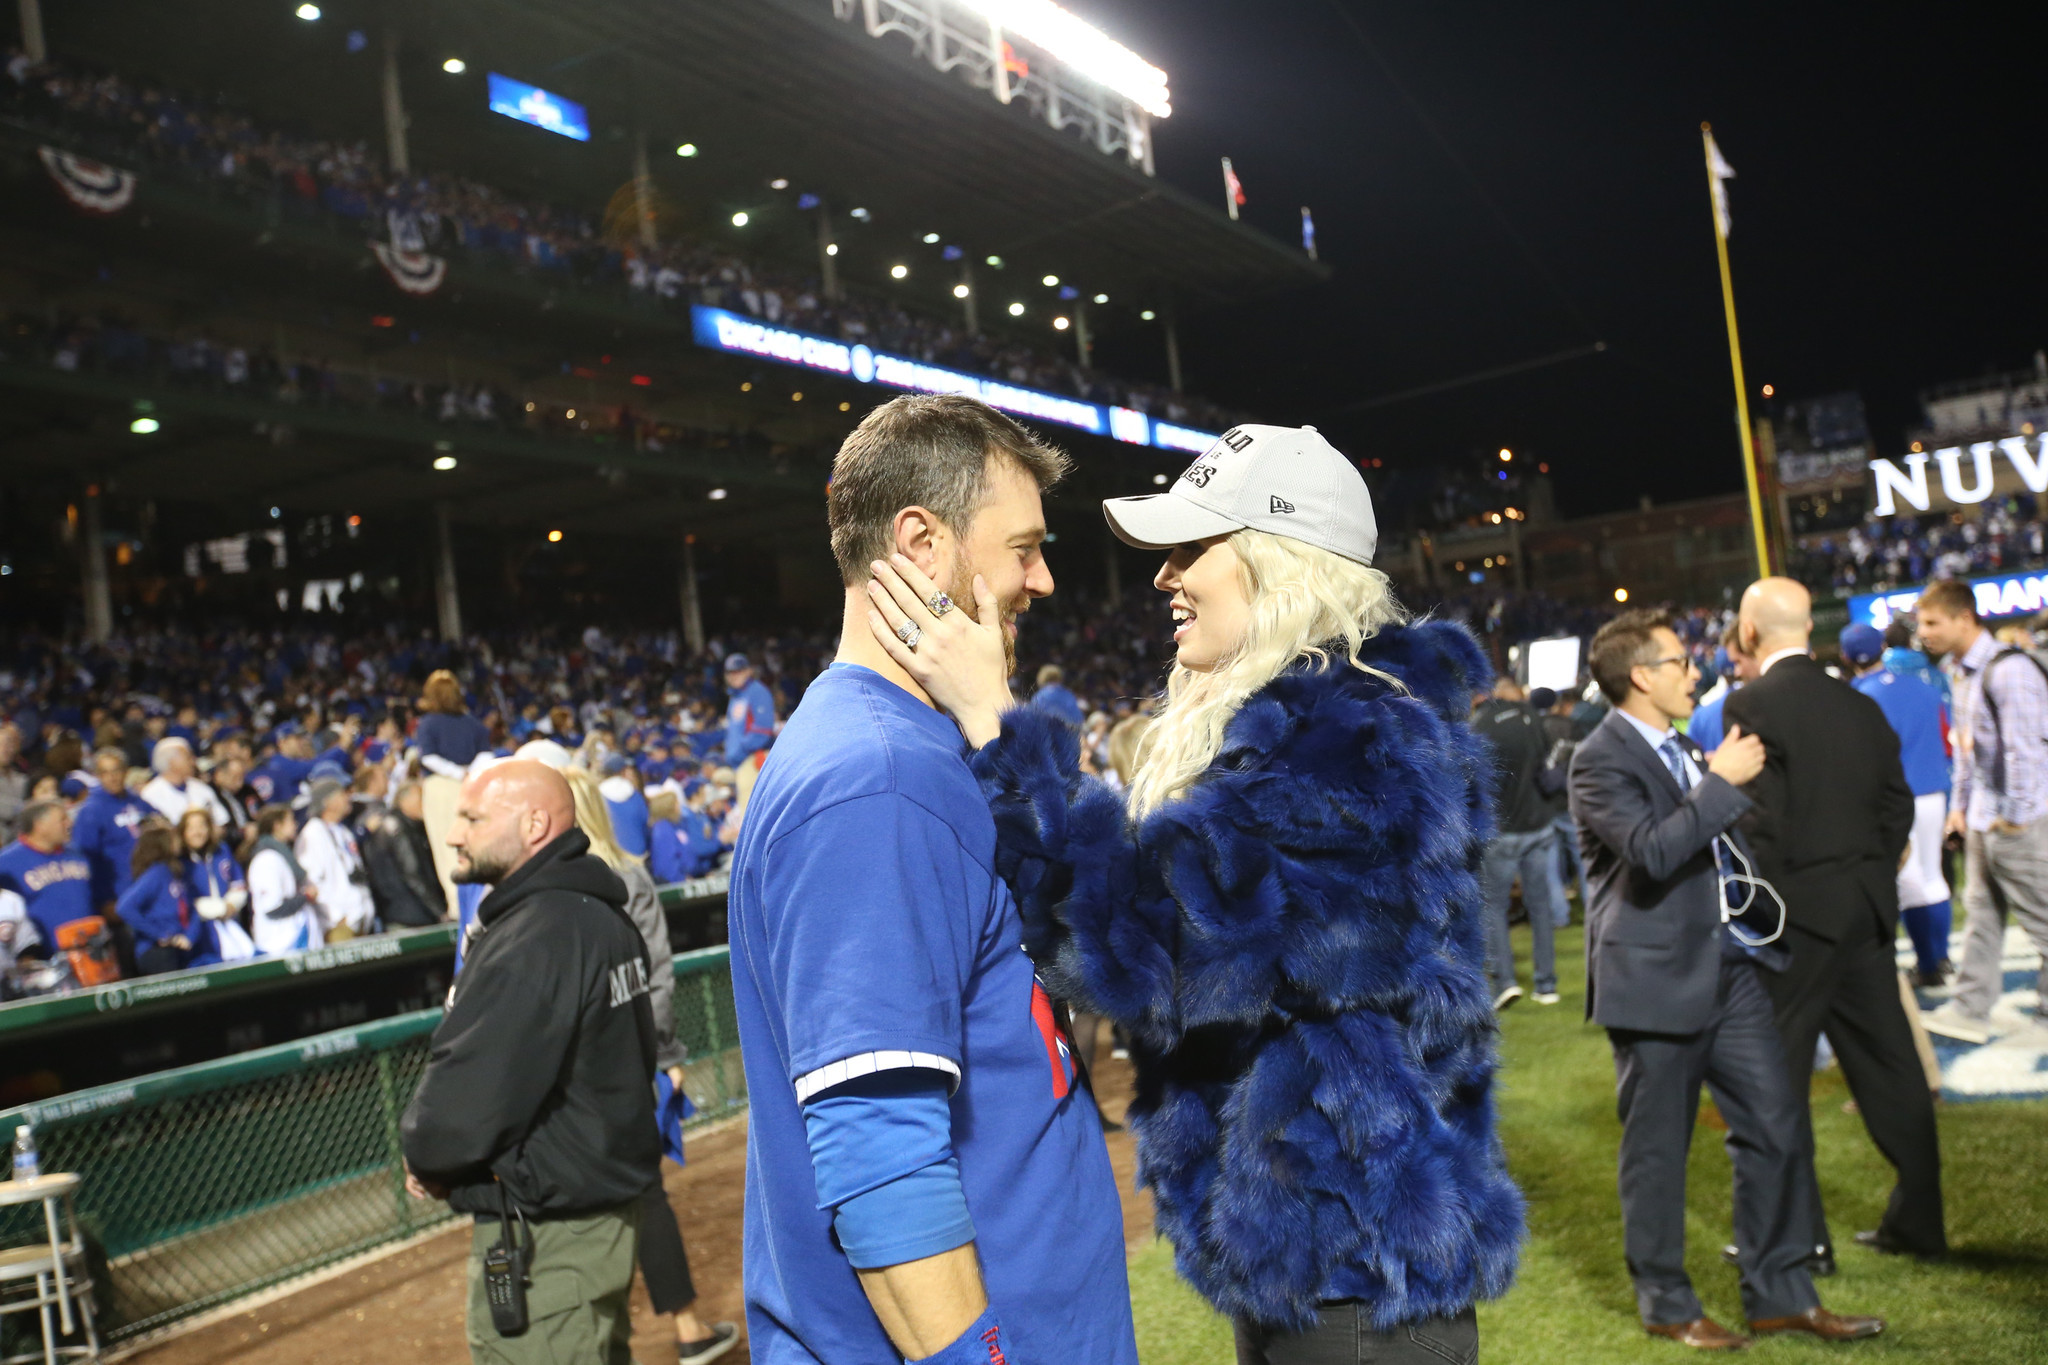 Julianna and Ben Zobrist divorce case might be resolved soon